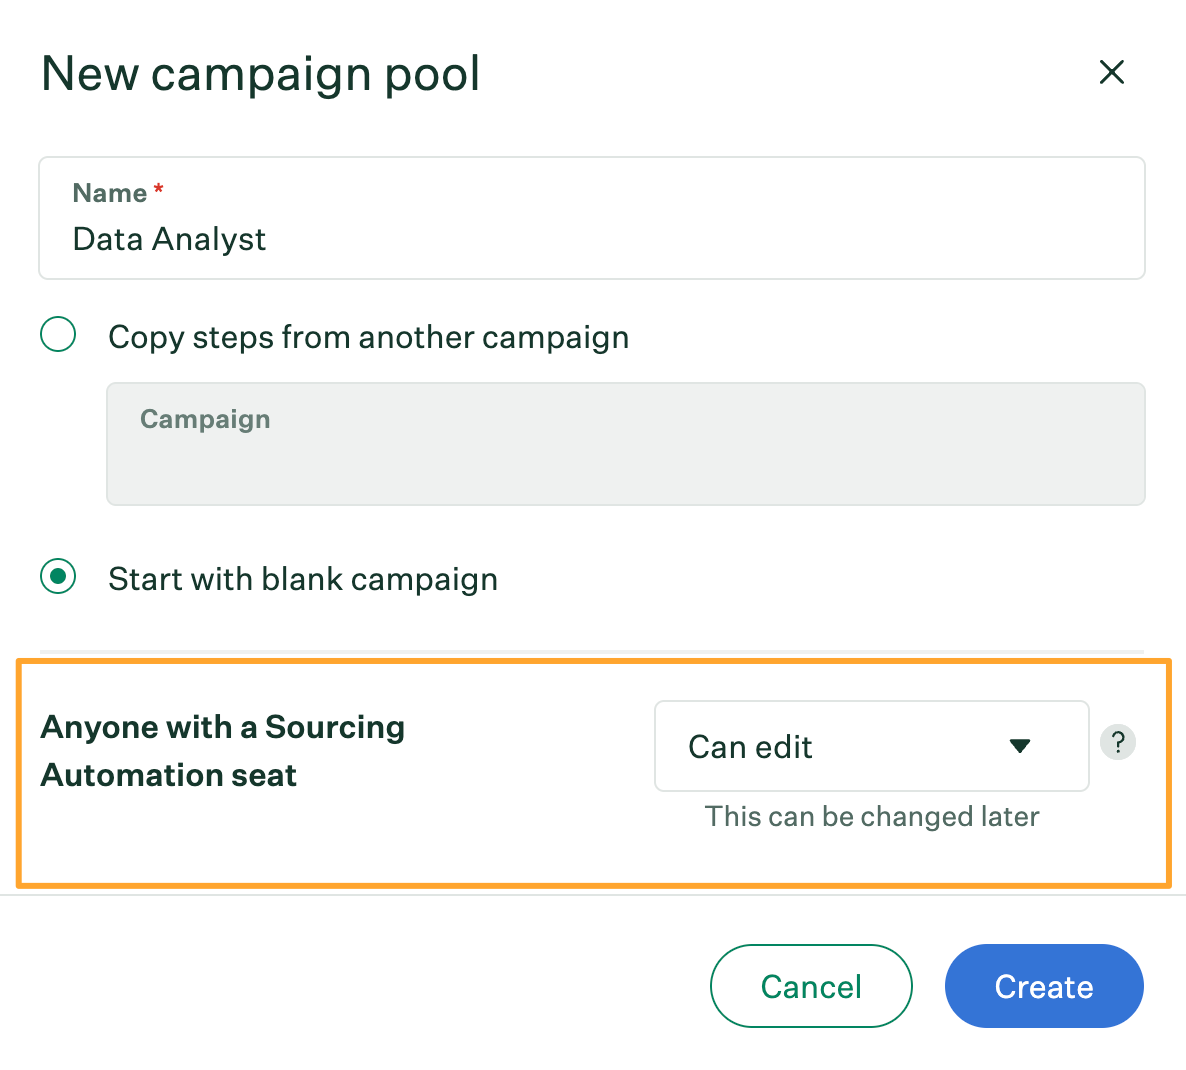 New campaign pool window with can view and can edit access permissions highlighted and can edit permission selected